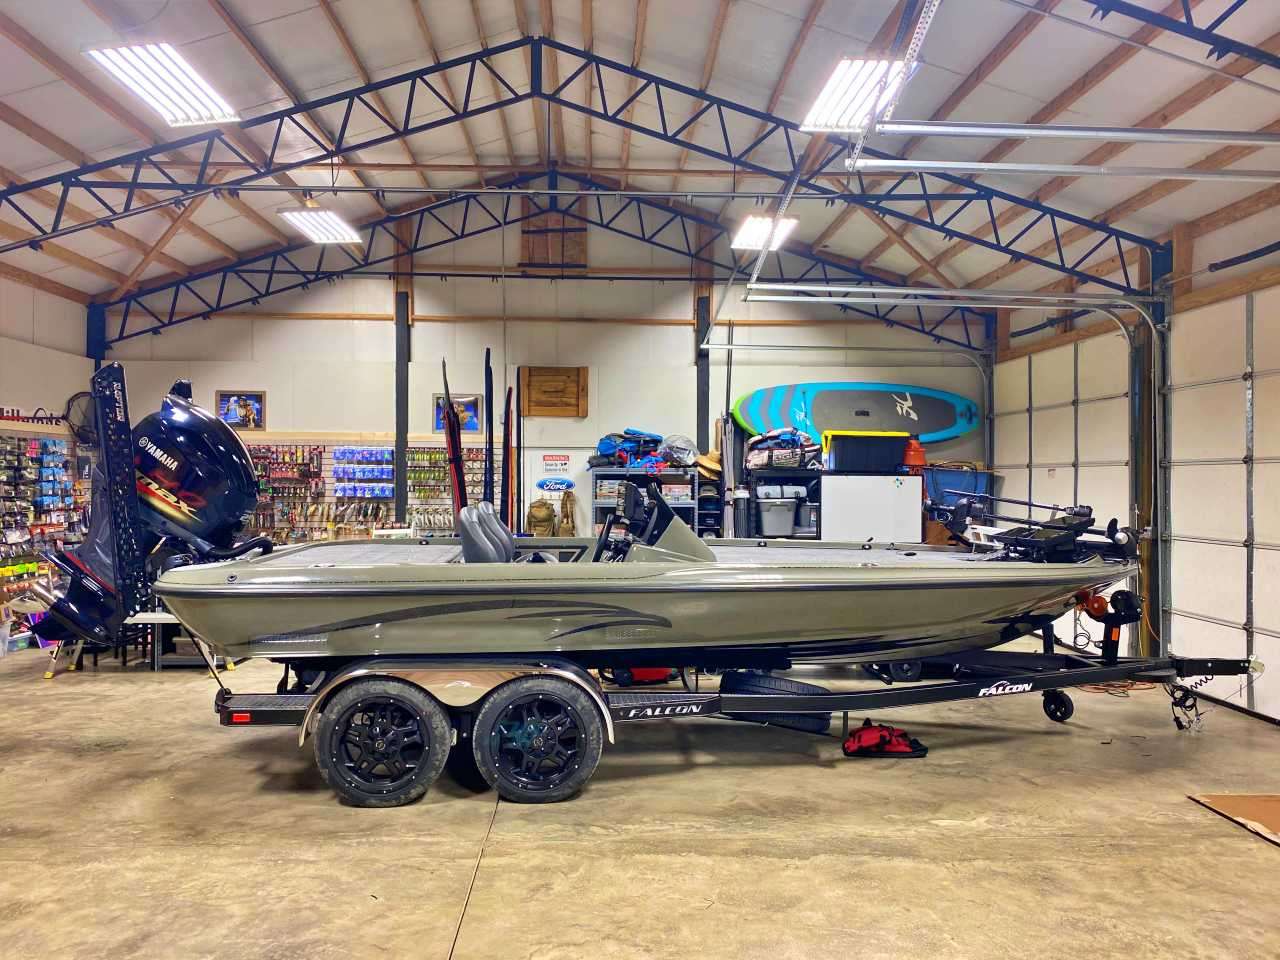 The install session is a wrap. And speaking of that, another installer is on the way to wrap the boat, truck and Lance Camper. The week after that will be spent loading the boat, truck and camper for the first tournament of the season. The work never ends in the âoffseason.â 
